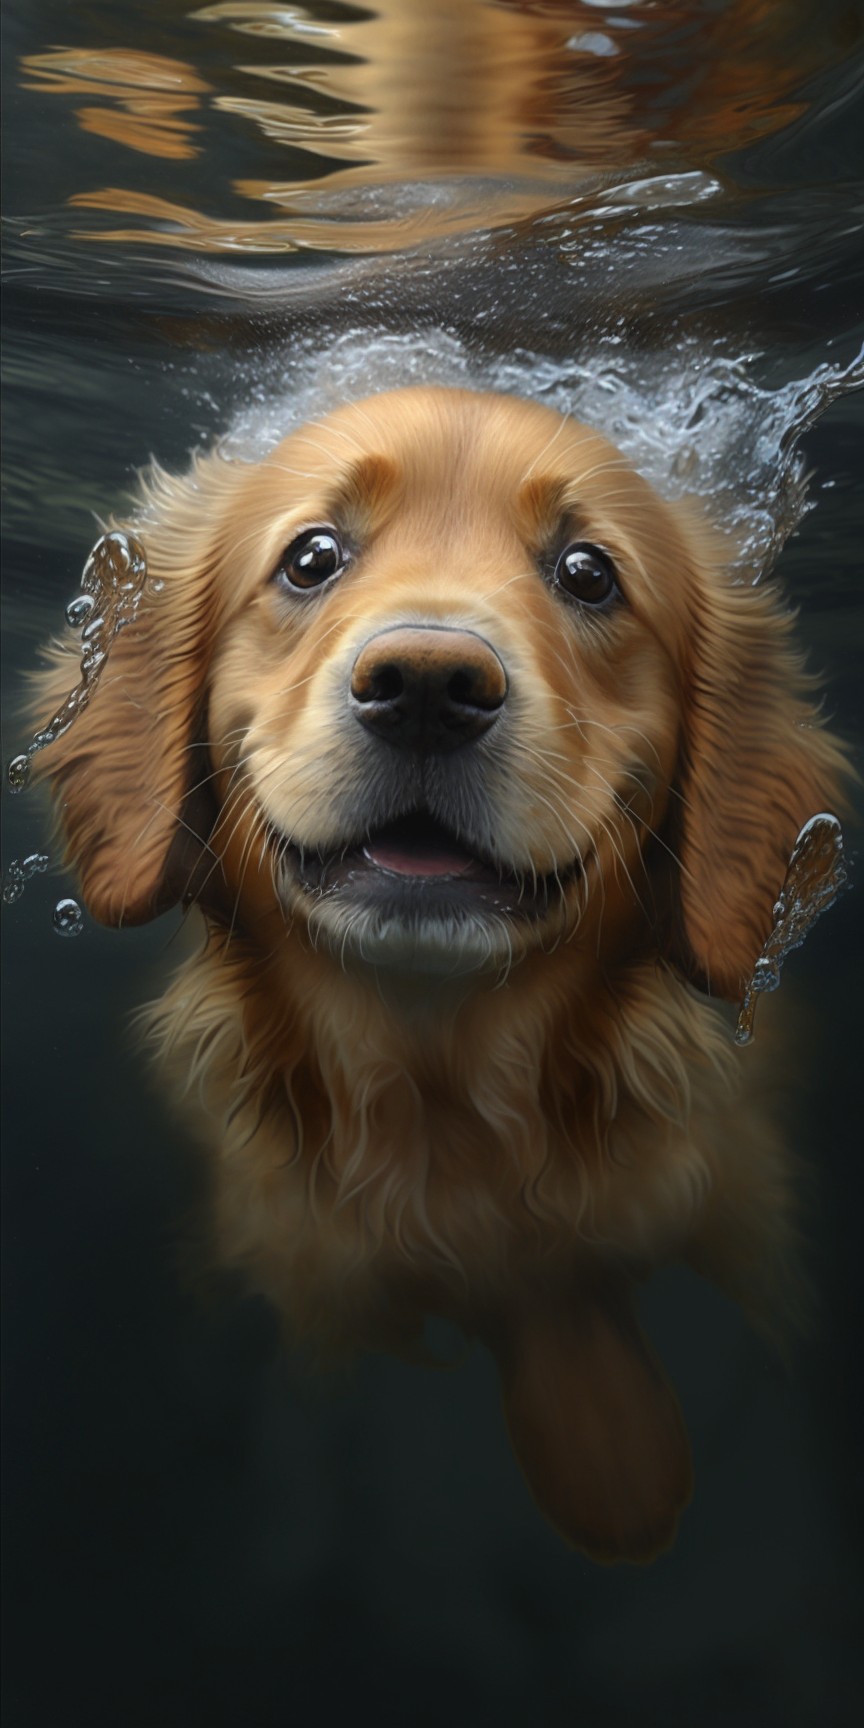 puppy swimming in water